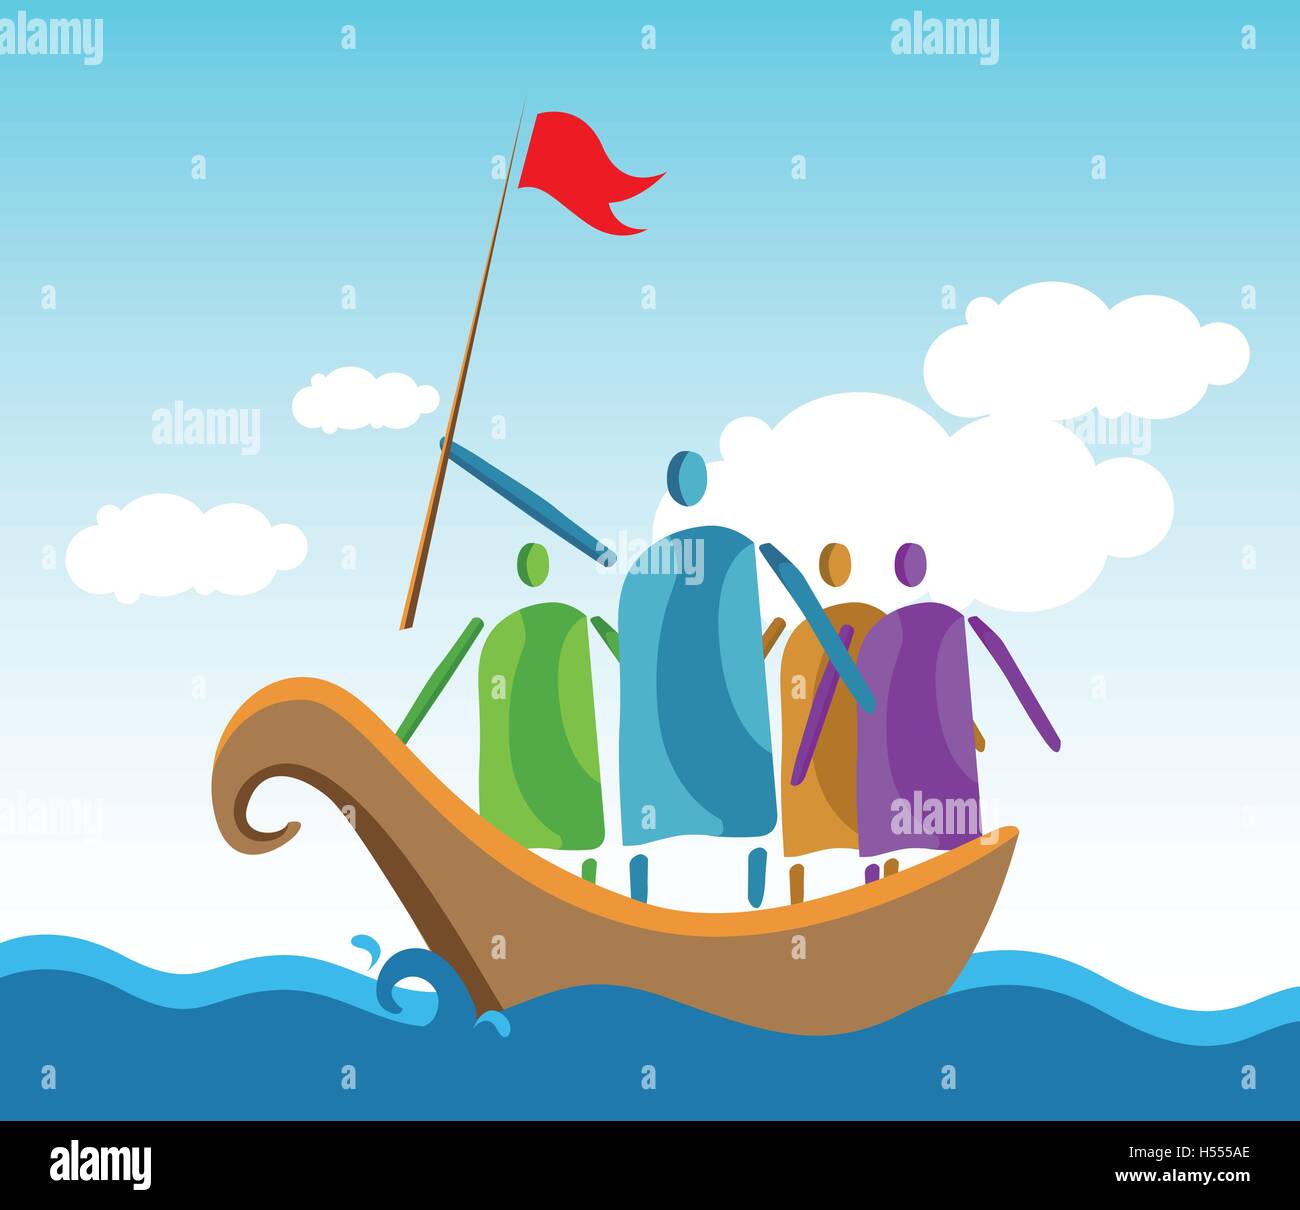 Leaders and people crowd the ocean. EPS 10 supported. Stock Vector